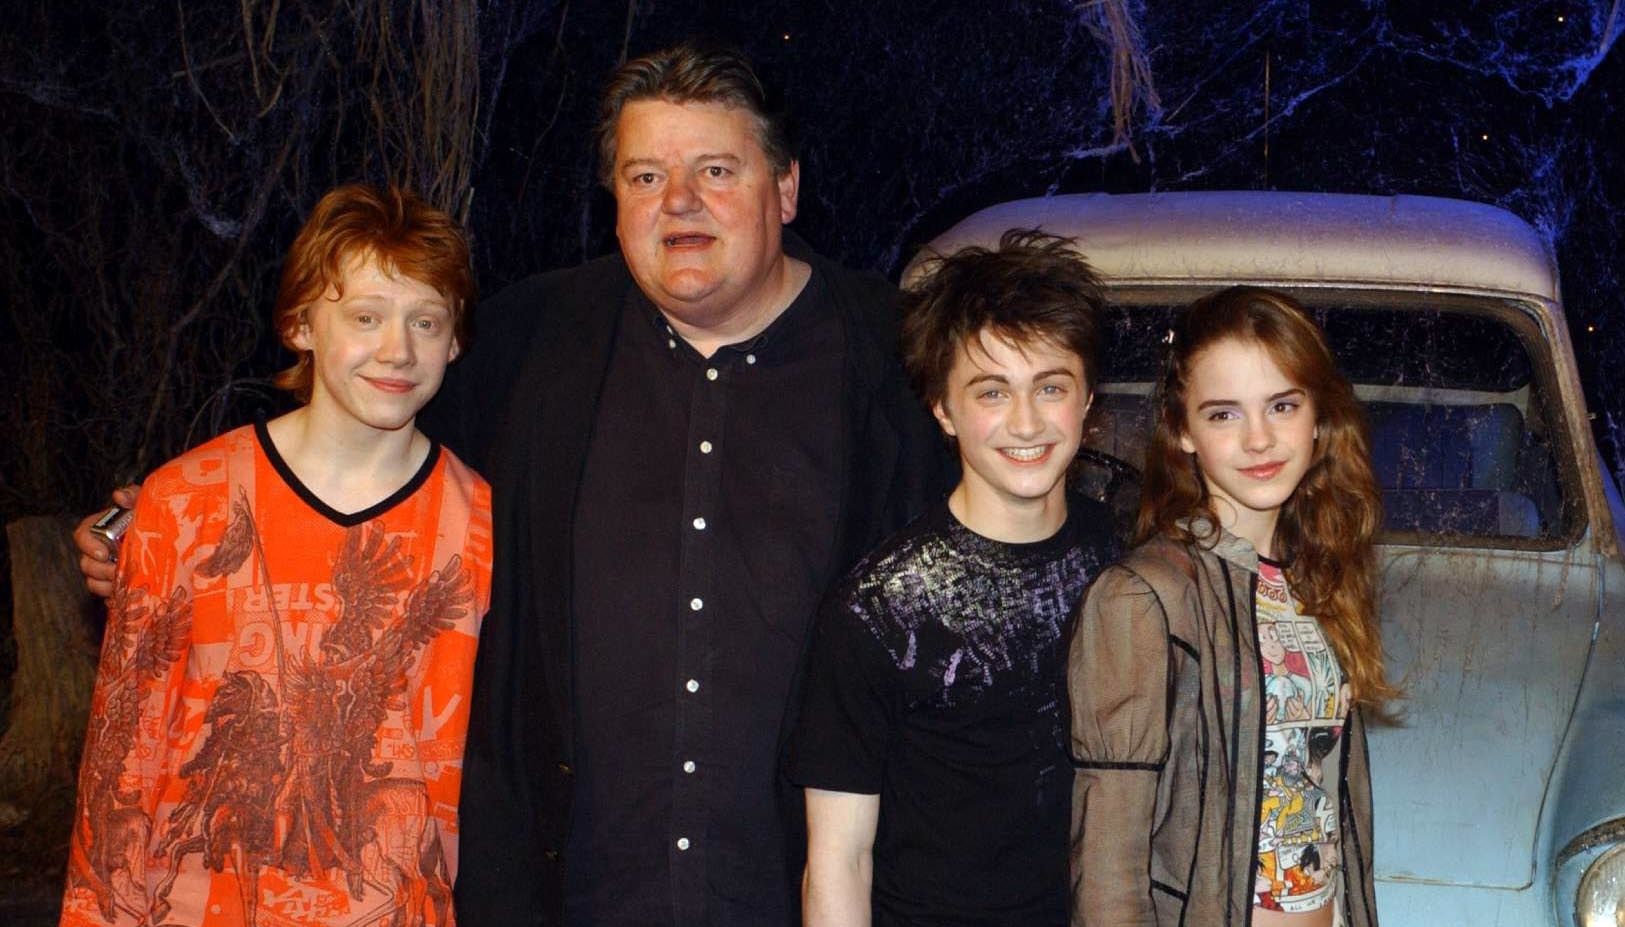 The stars of Harry Potter and the Chamber of Secrets, from left to right; Rupert Grint, Robbie Coltrane, Daniel Radcliffe Emma Watson during the worldwide launch of the DVD/VHS at Leavesden Studios in north London.